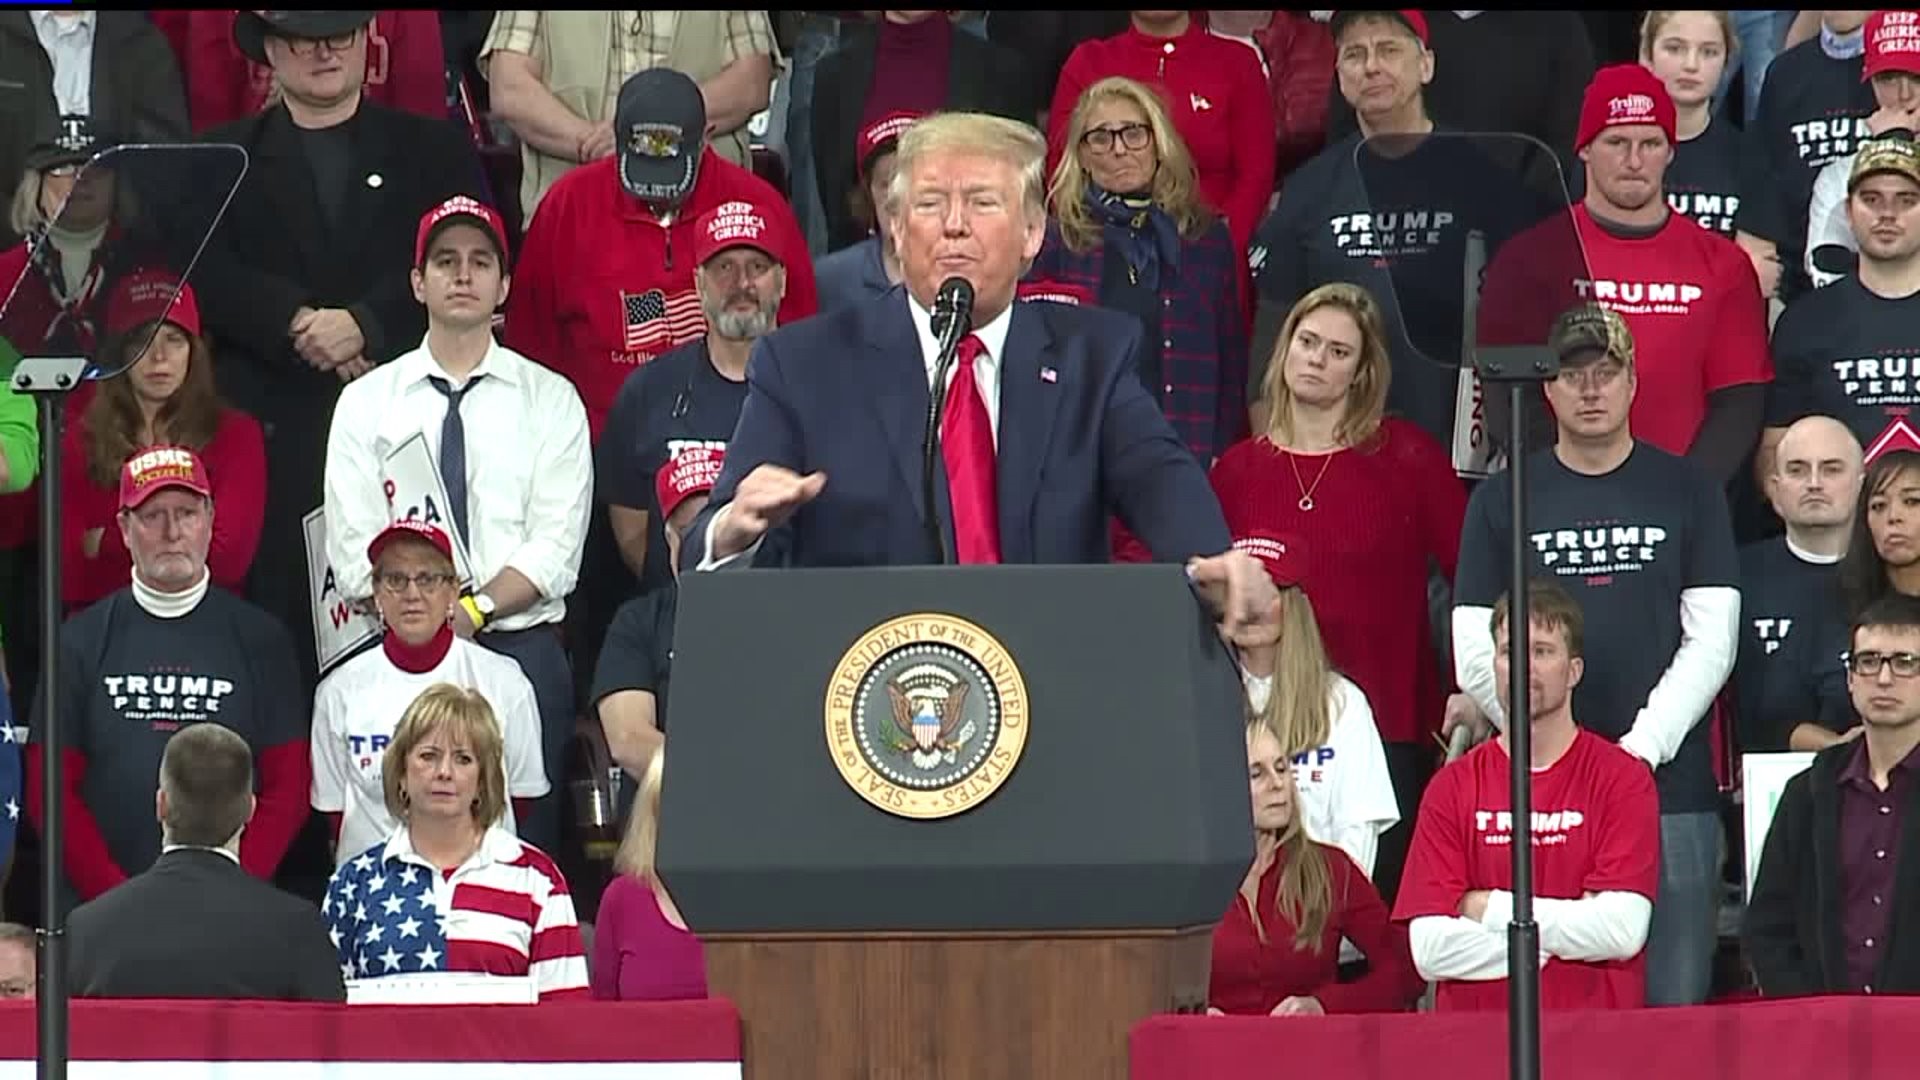 President Trump Holds Keep America Great Rally at the Giant Center in Hershey, PA